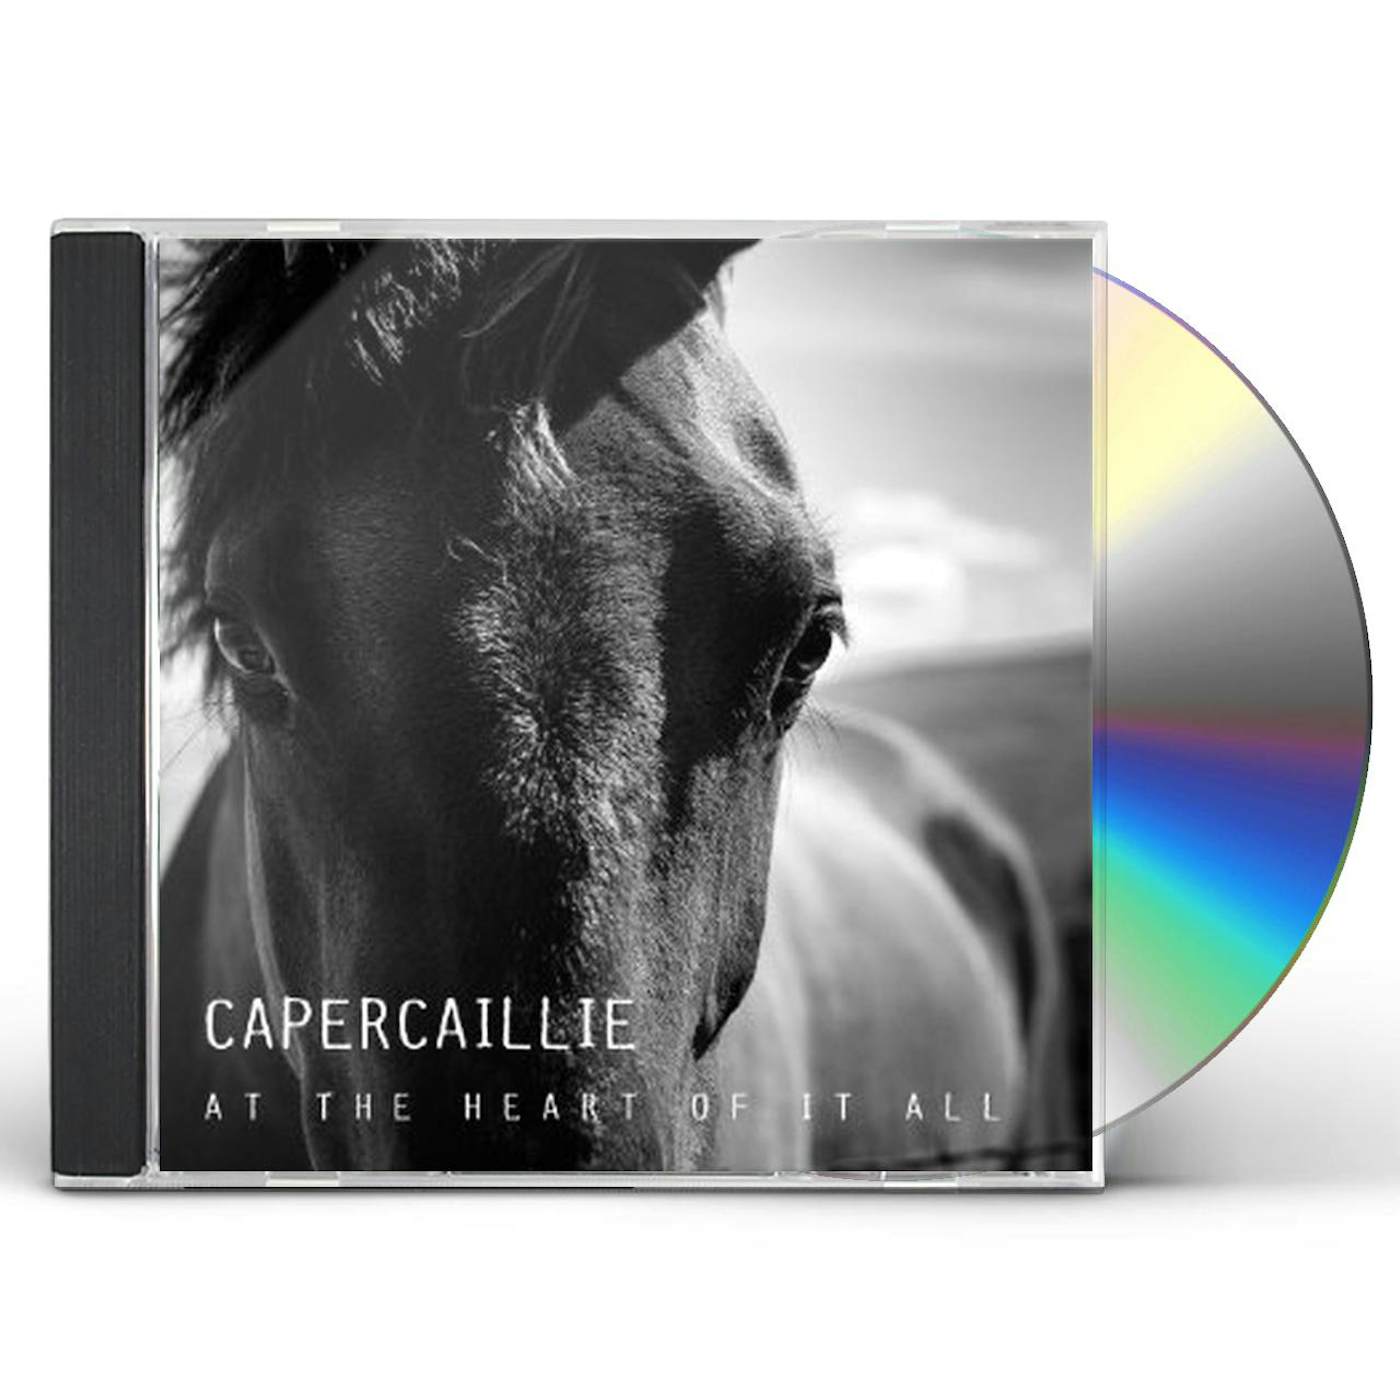 Capercaillie AT THE HEART OF IT ALL CD